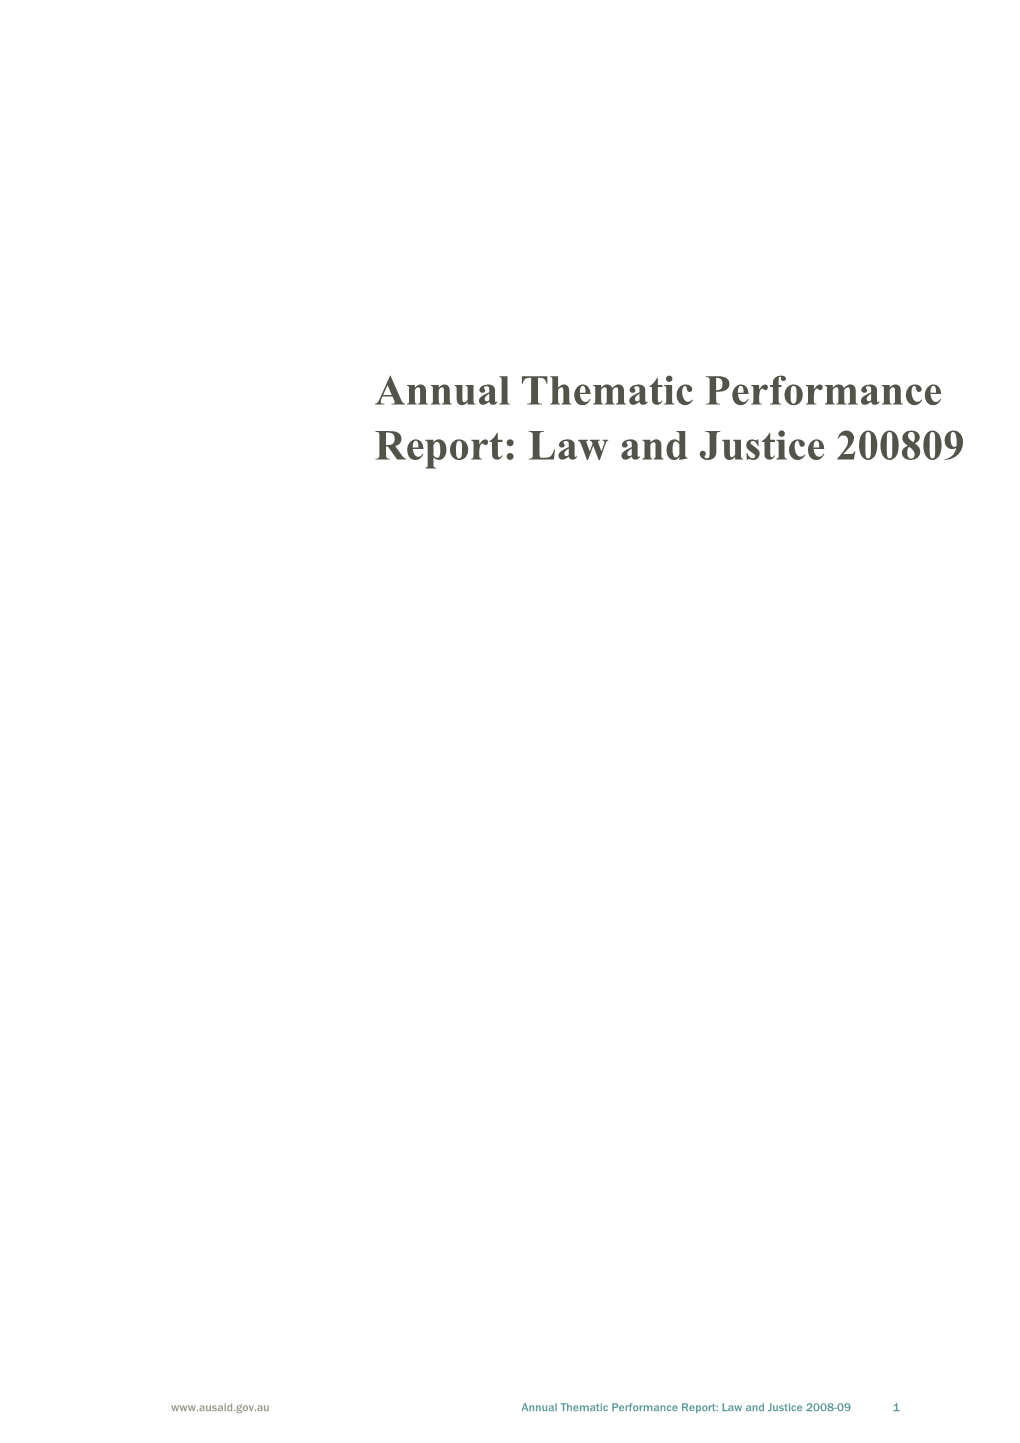 Annual Thematic Performance Report: Law and Justice200809